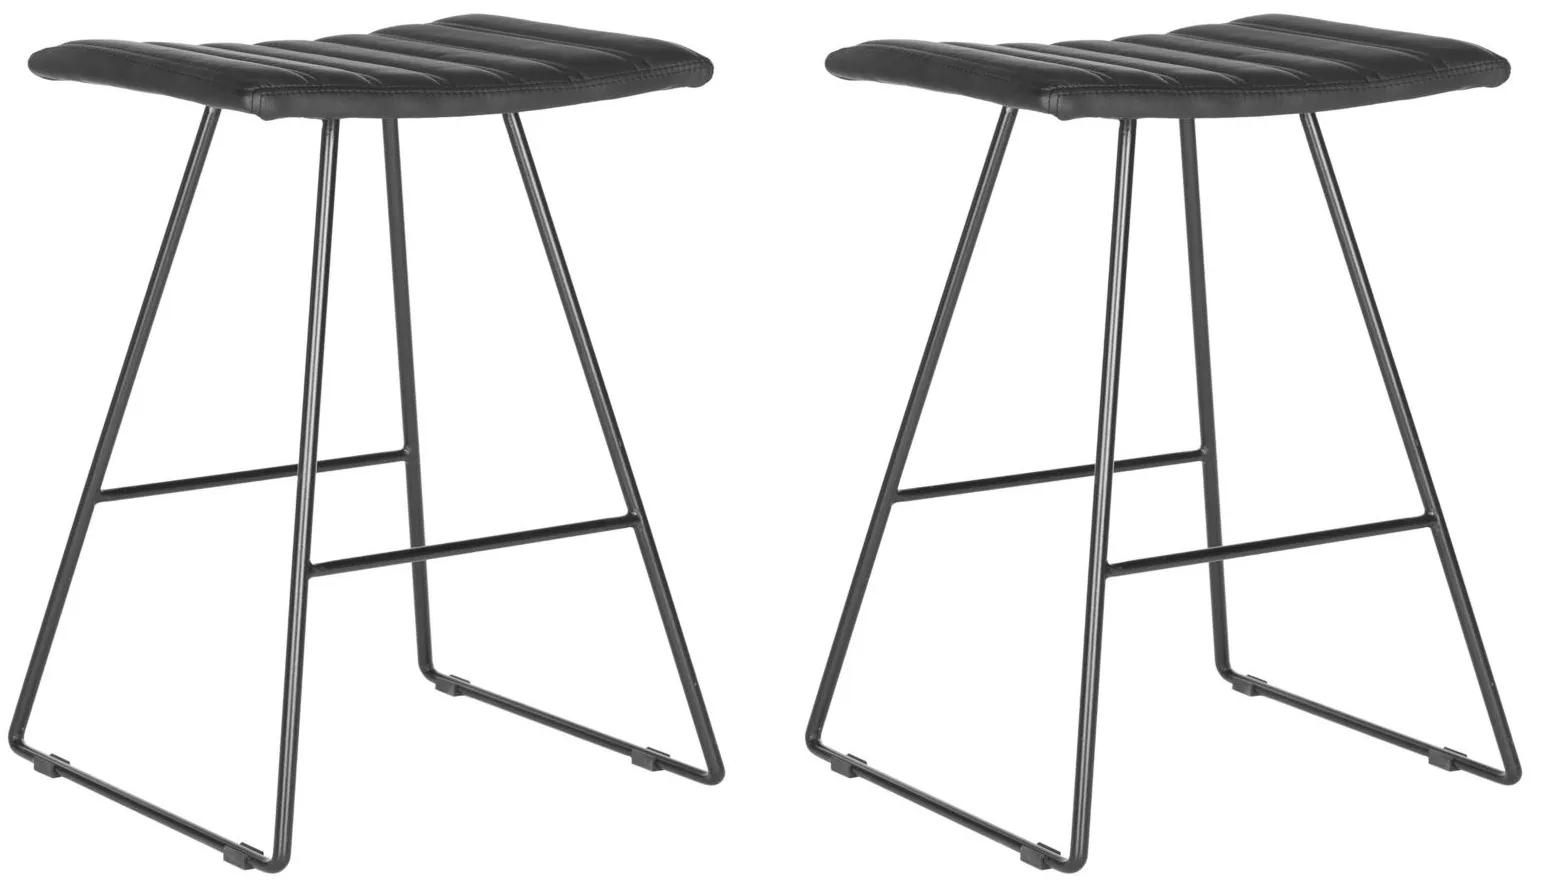 Roy Counter Stool - Set of 2 in Black by Safavieh